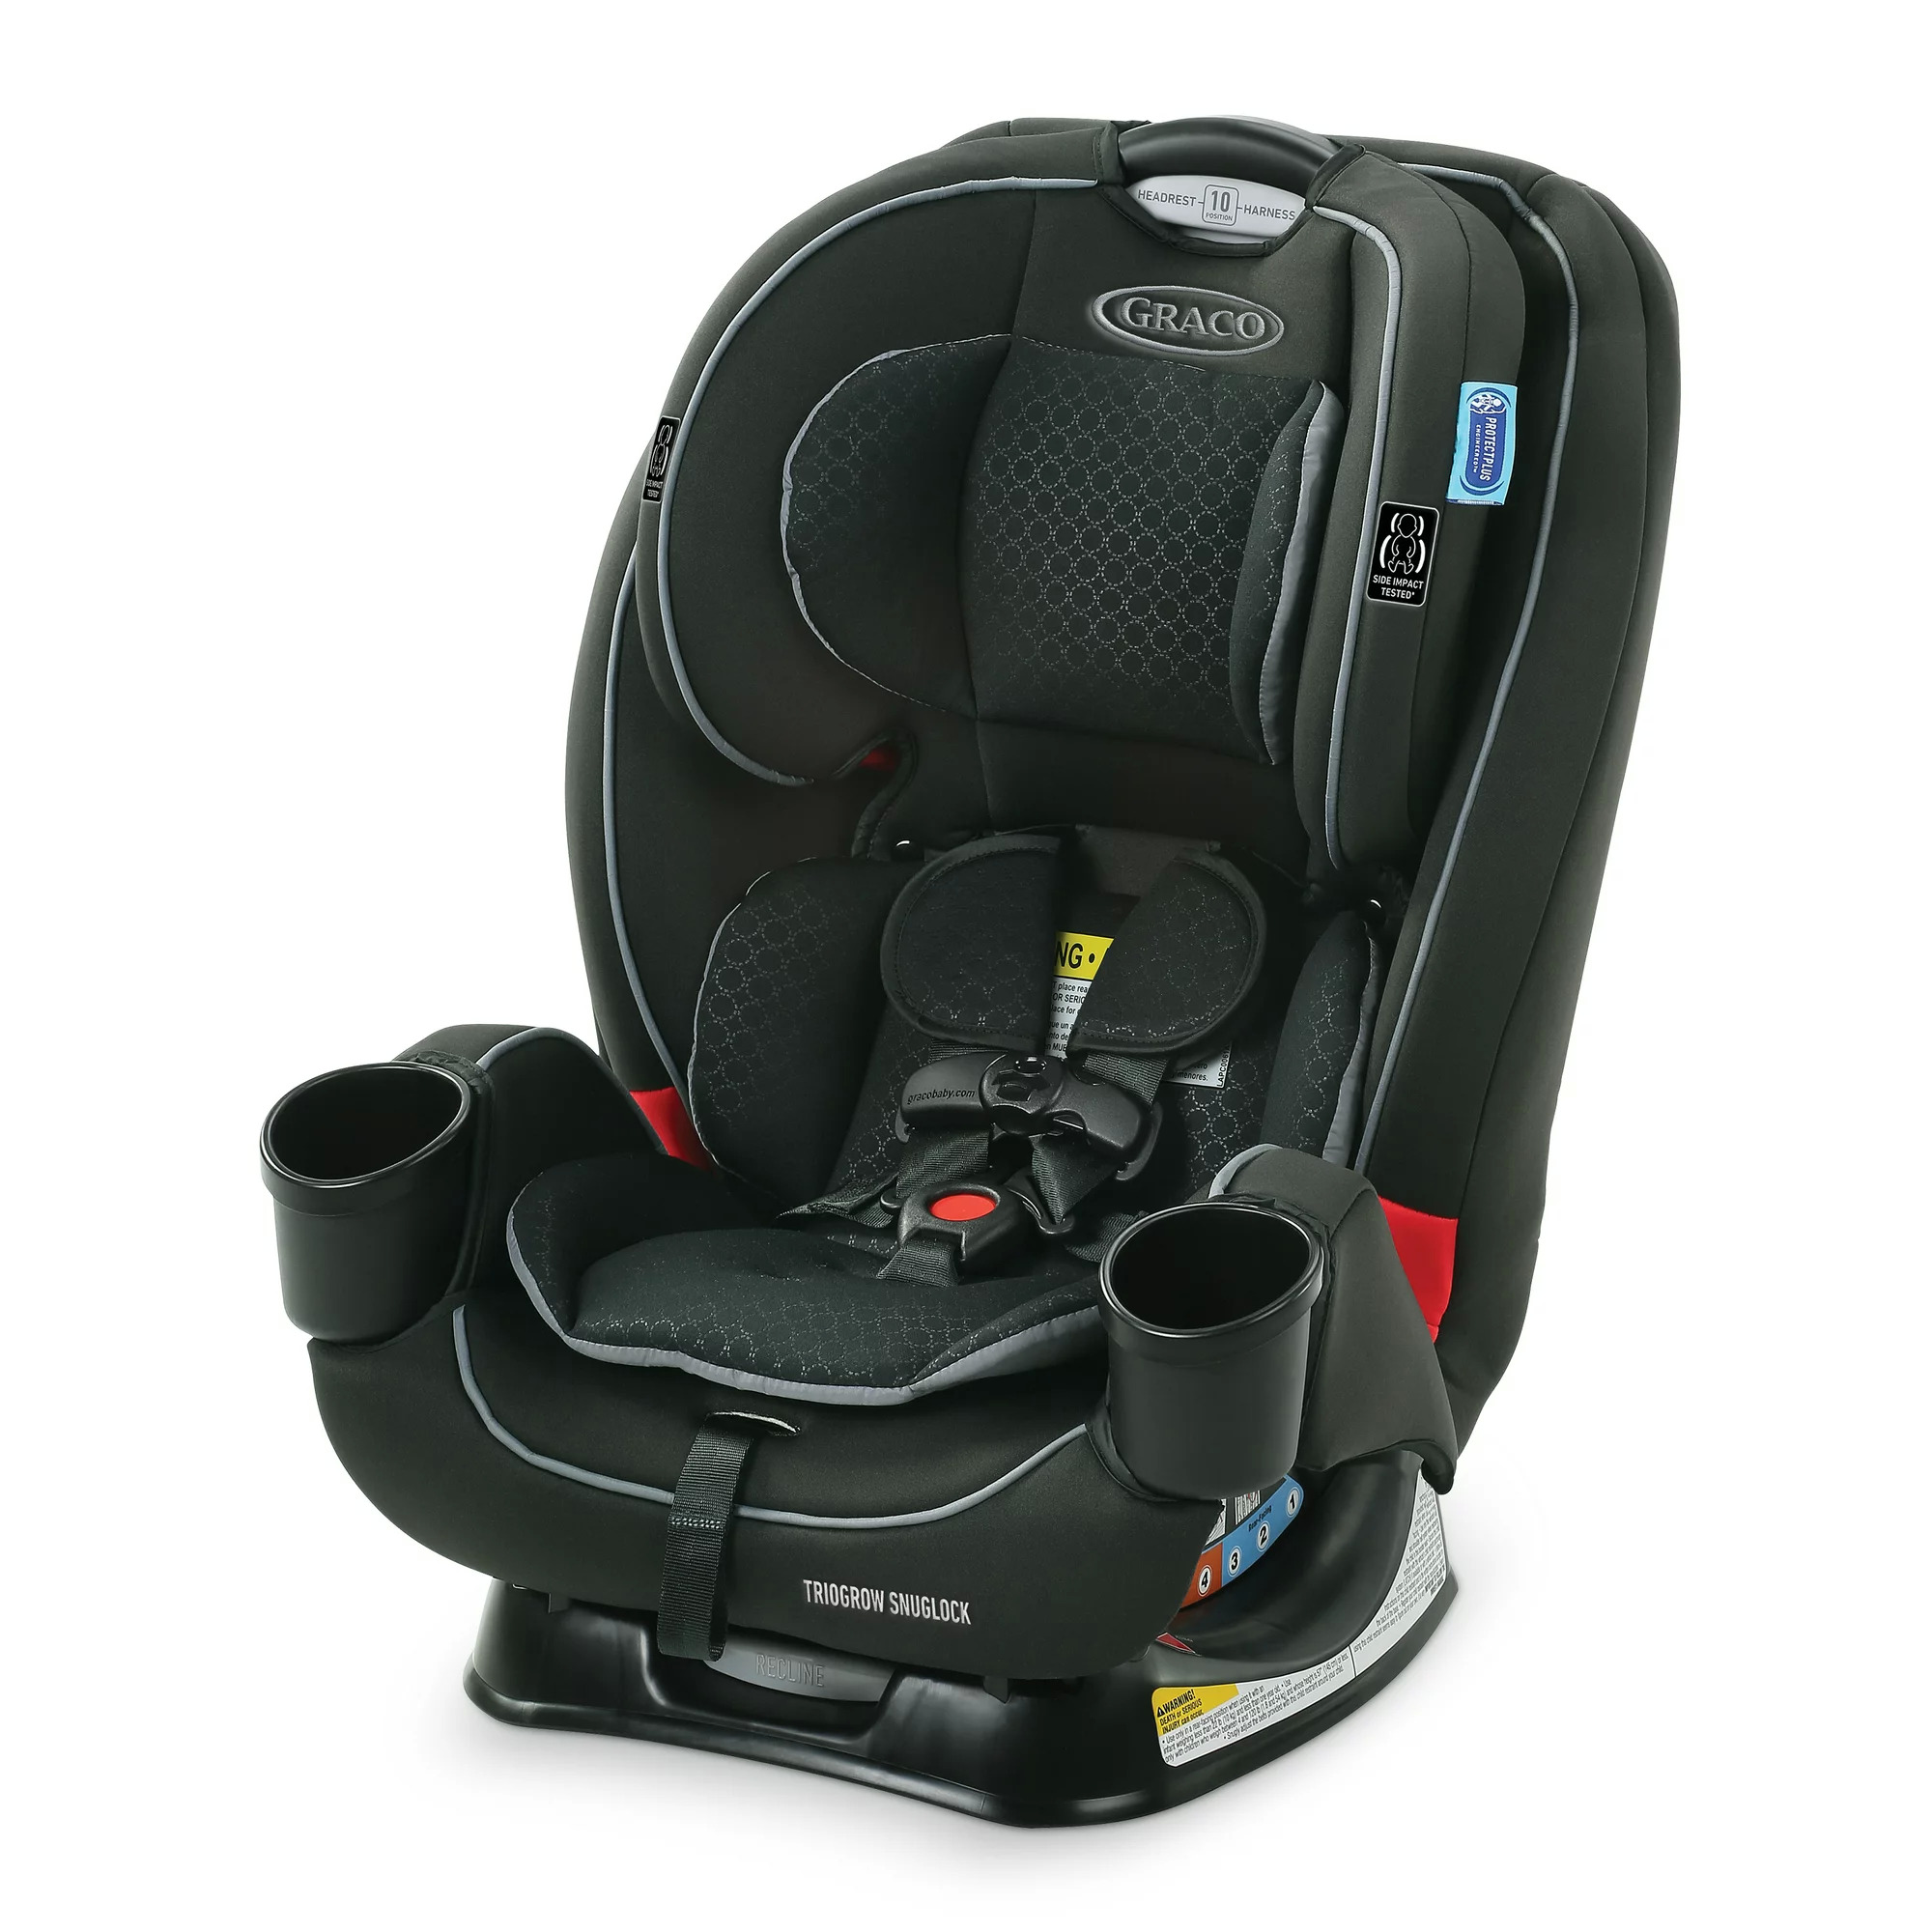 Graco TrioGrow SnugLock 3-1 Car Seat $150, Graco TurboBooster Stretch2Fit Booster Seat $80 & More + Free Shipping